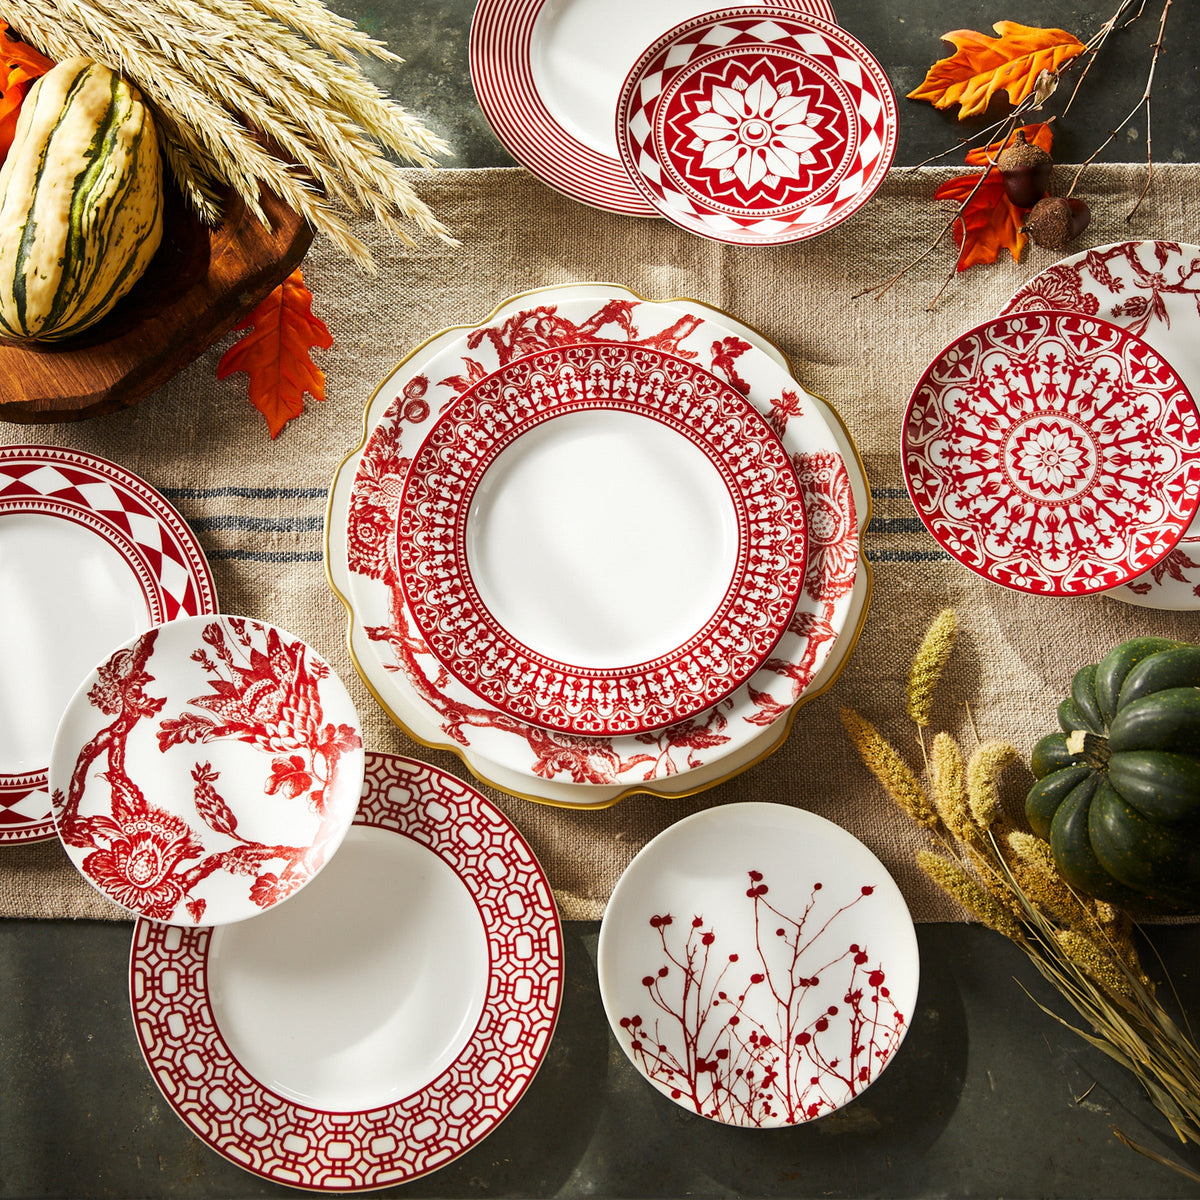 A collection of premium porcelain white plates with red decorative patterns, including Caskata Artisanal Home Newport Garden Gate Crimson Rimmed Salad Plates, arranged on a table with autumn-themed items like dried leaves and gourds.